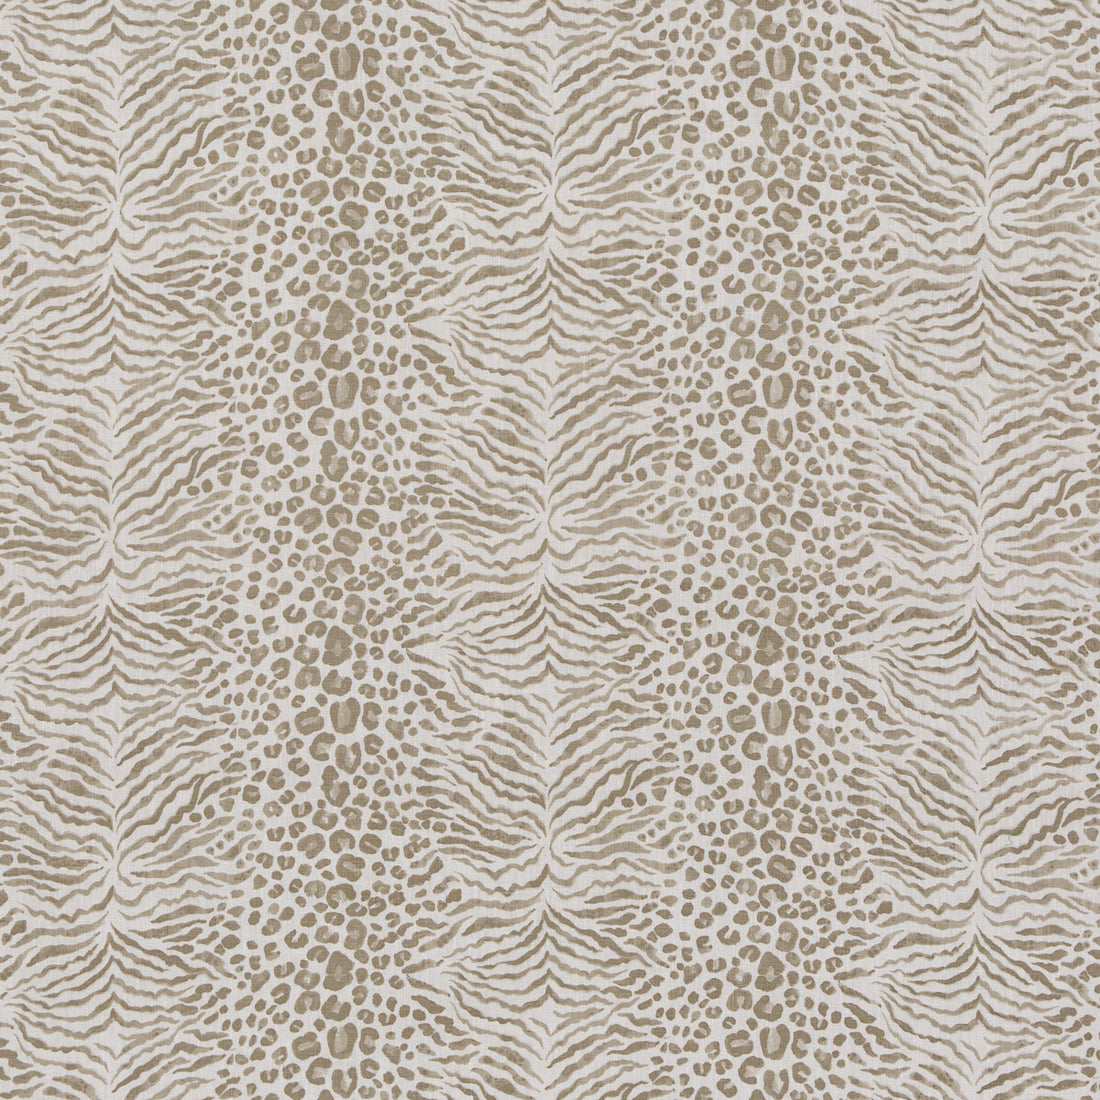 Chatto fabric in bronze color - pattern BP10952.850.0 - by G P &amp; J Baker in the Ashmore collection